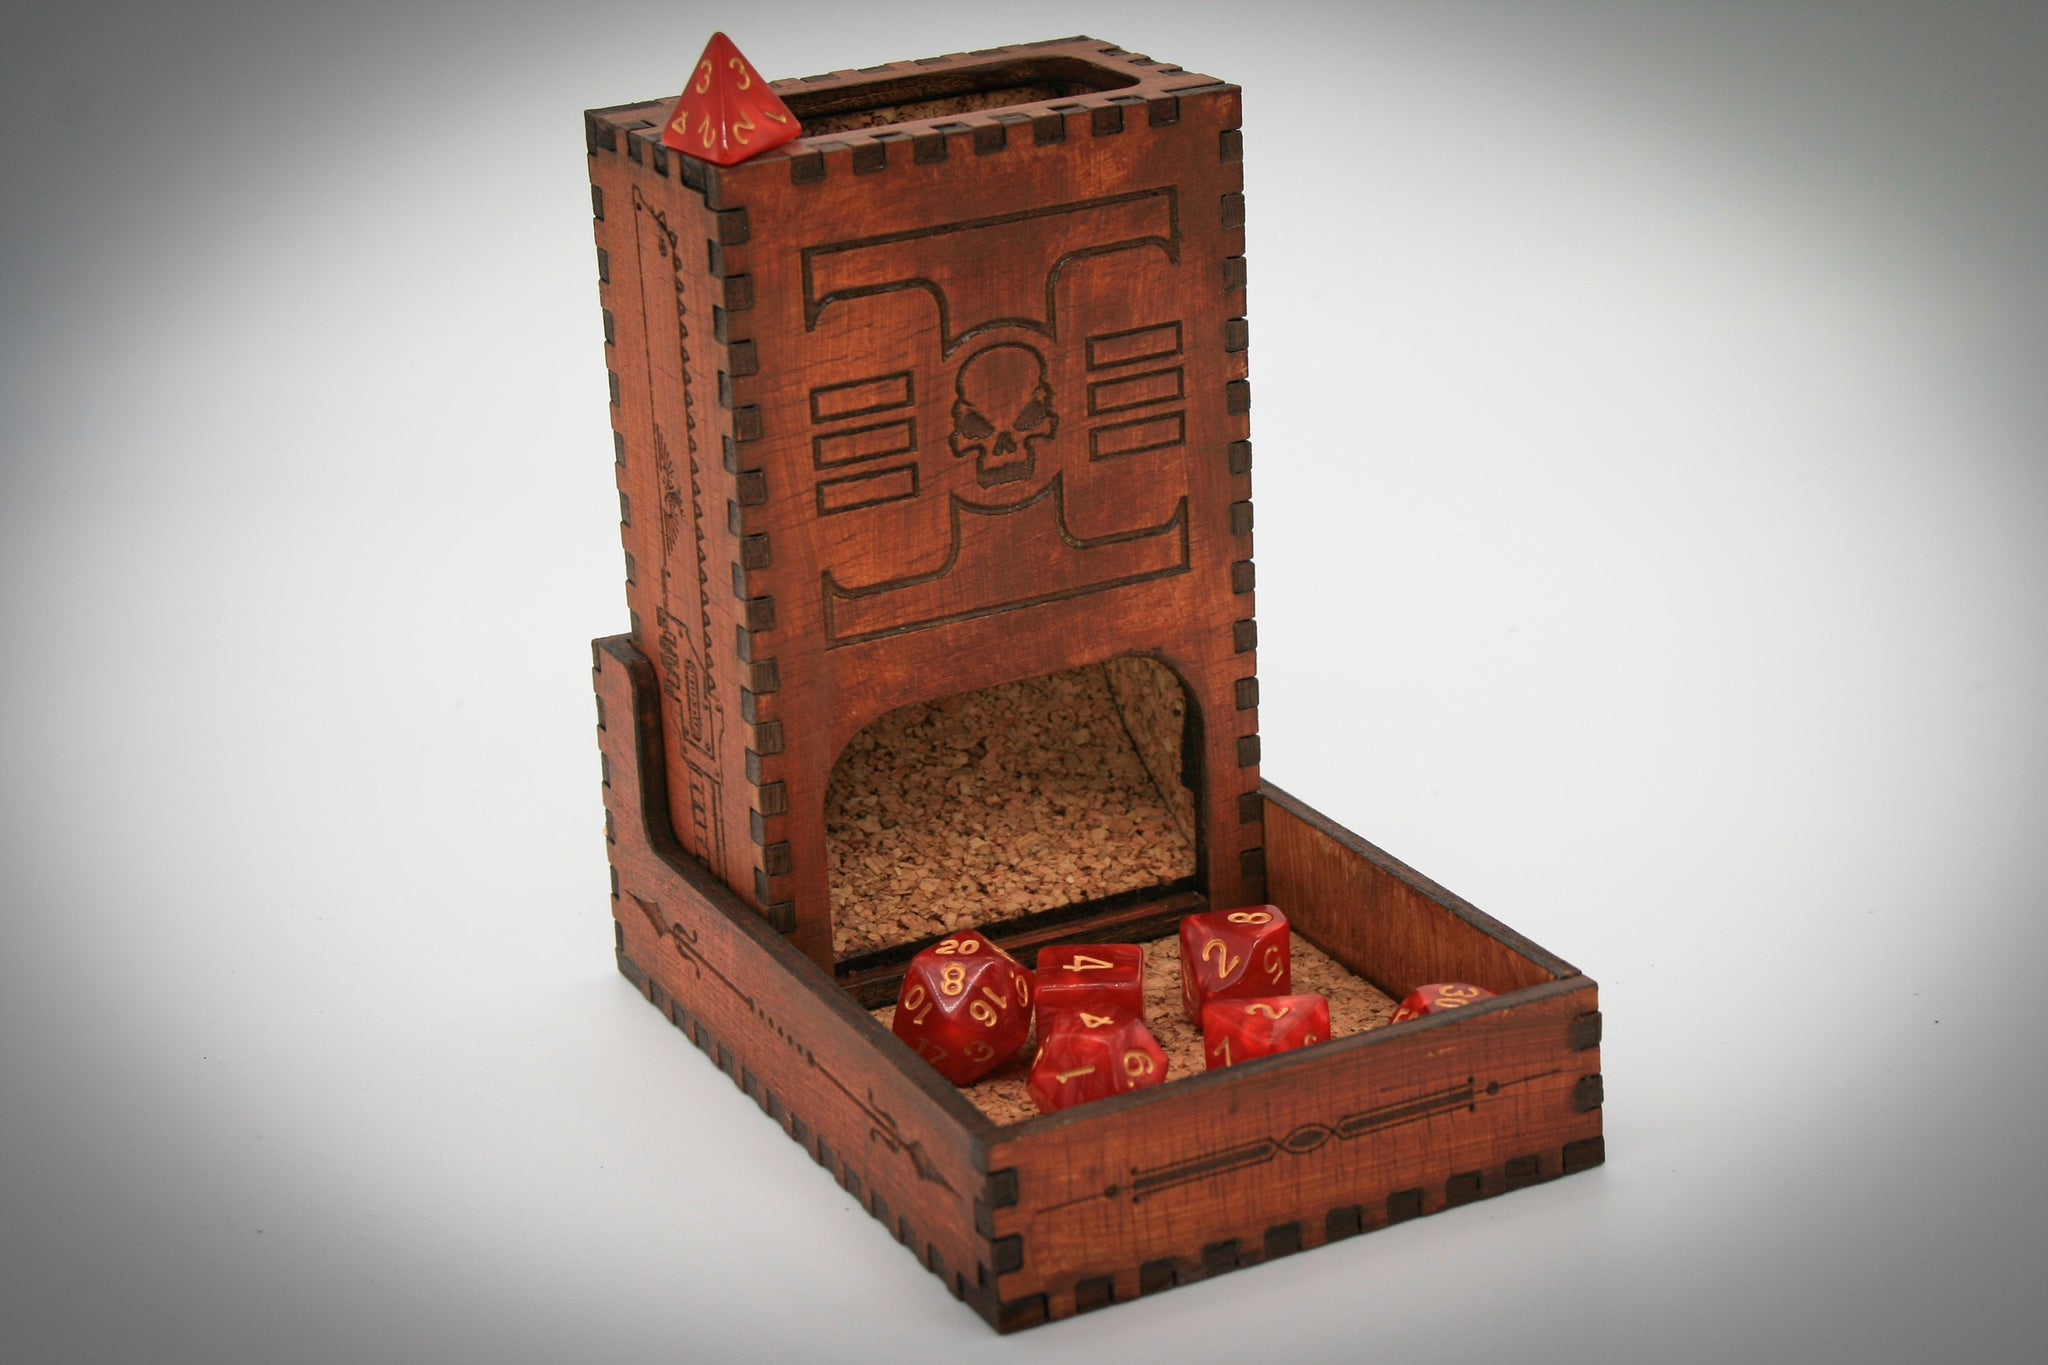 Dice Tower & Storage Box Compatible With Any Tabletop RPG or Board